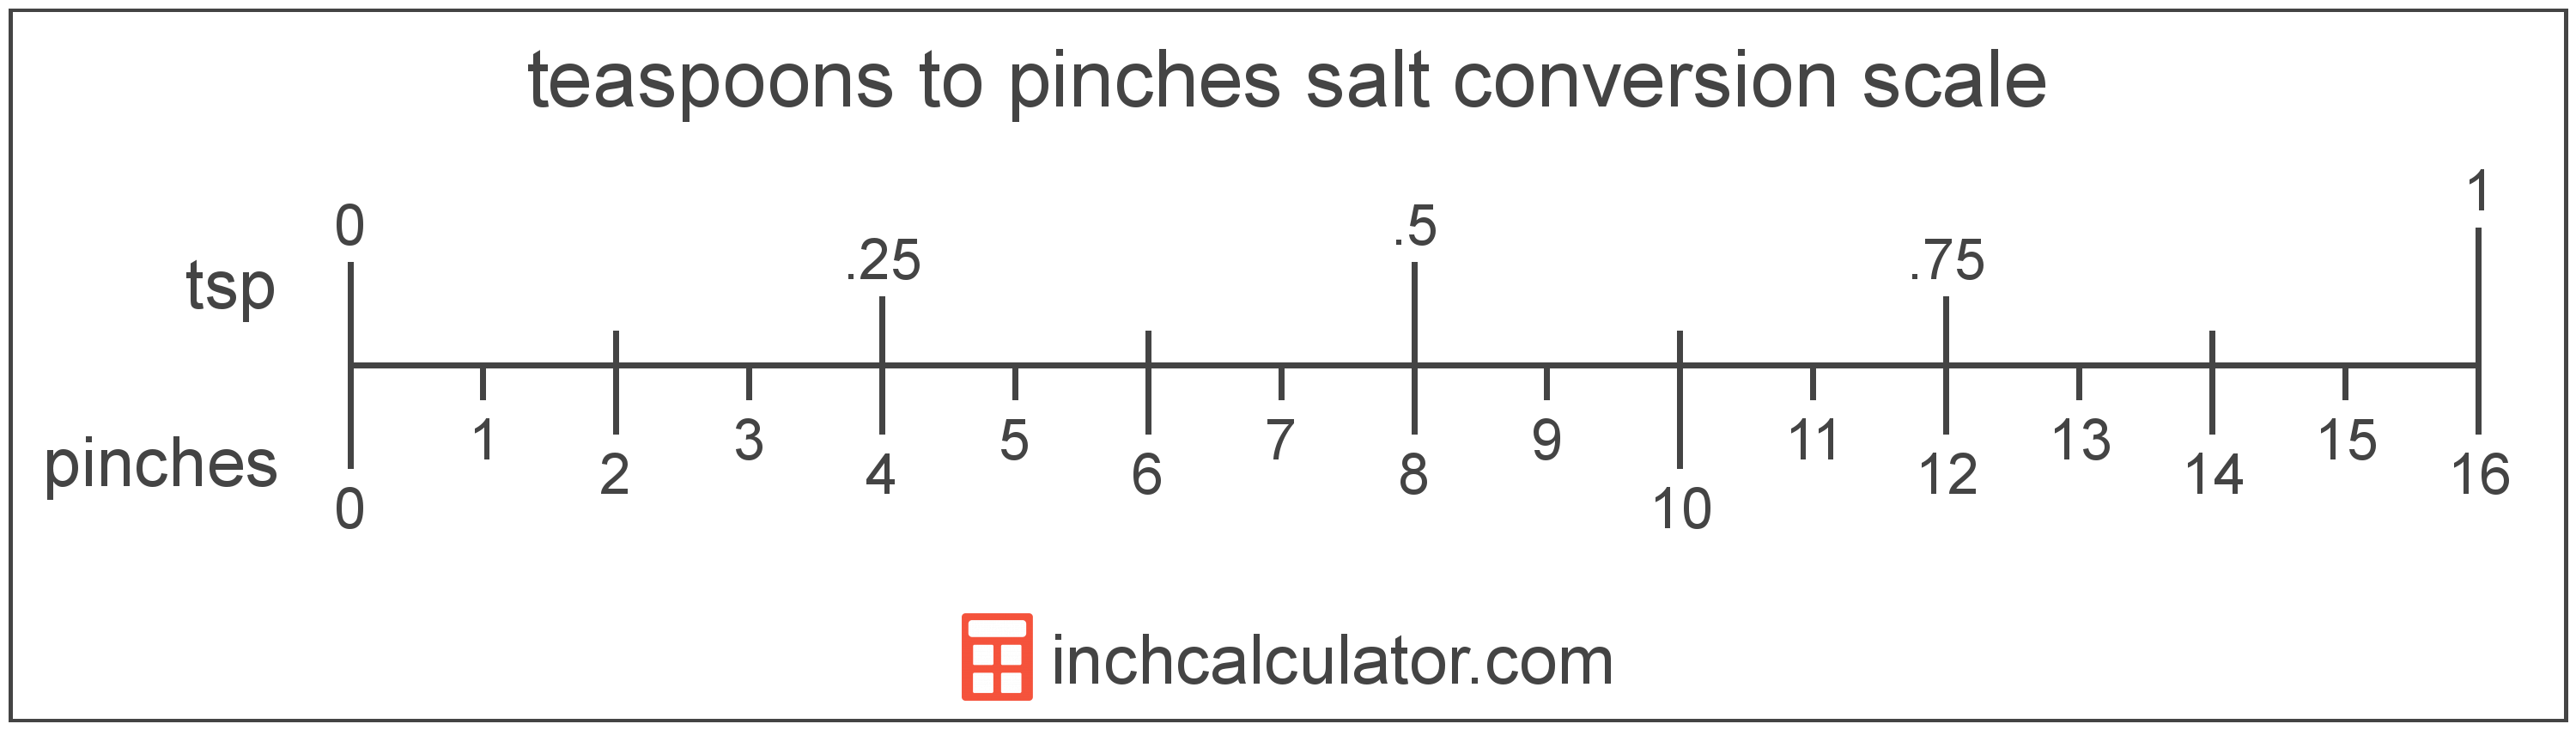 conversion scale showing pinches and equivalent teaspoons amount of salt values